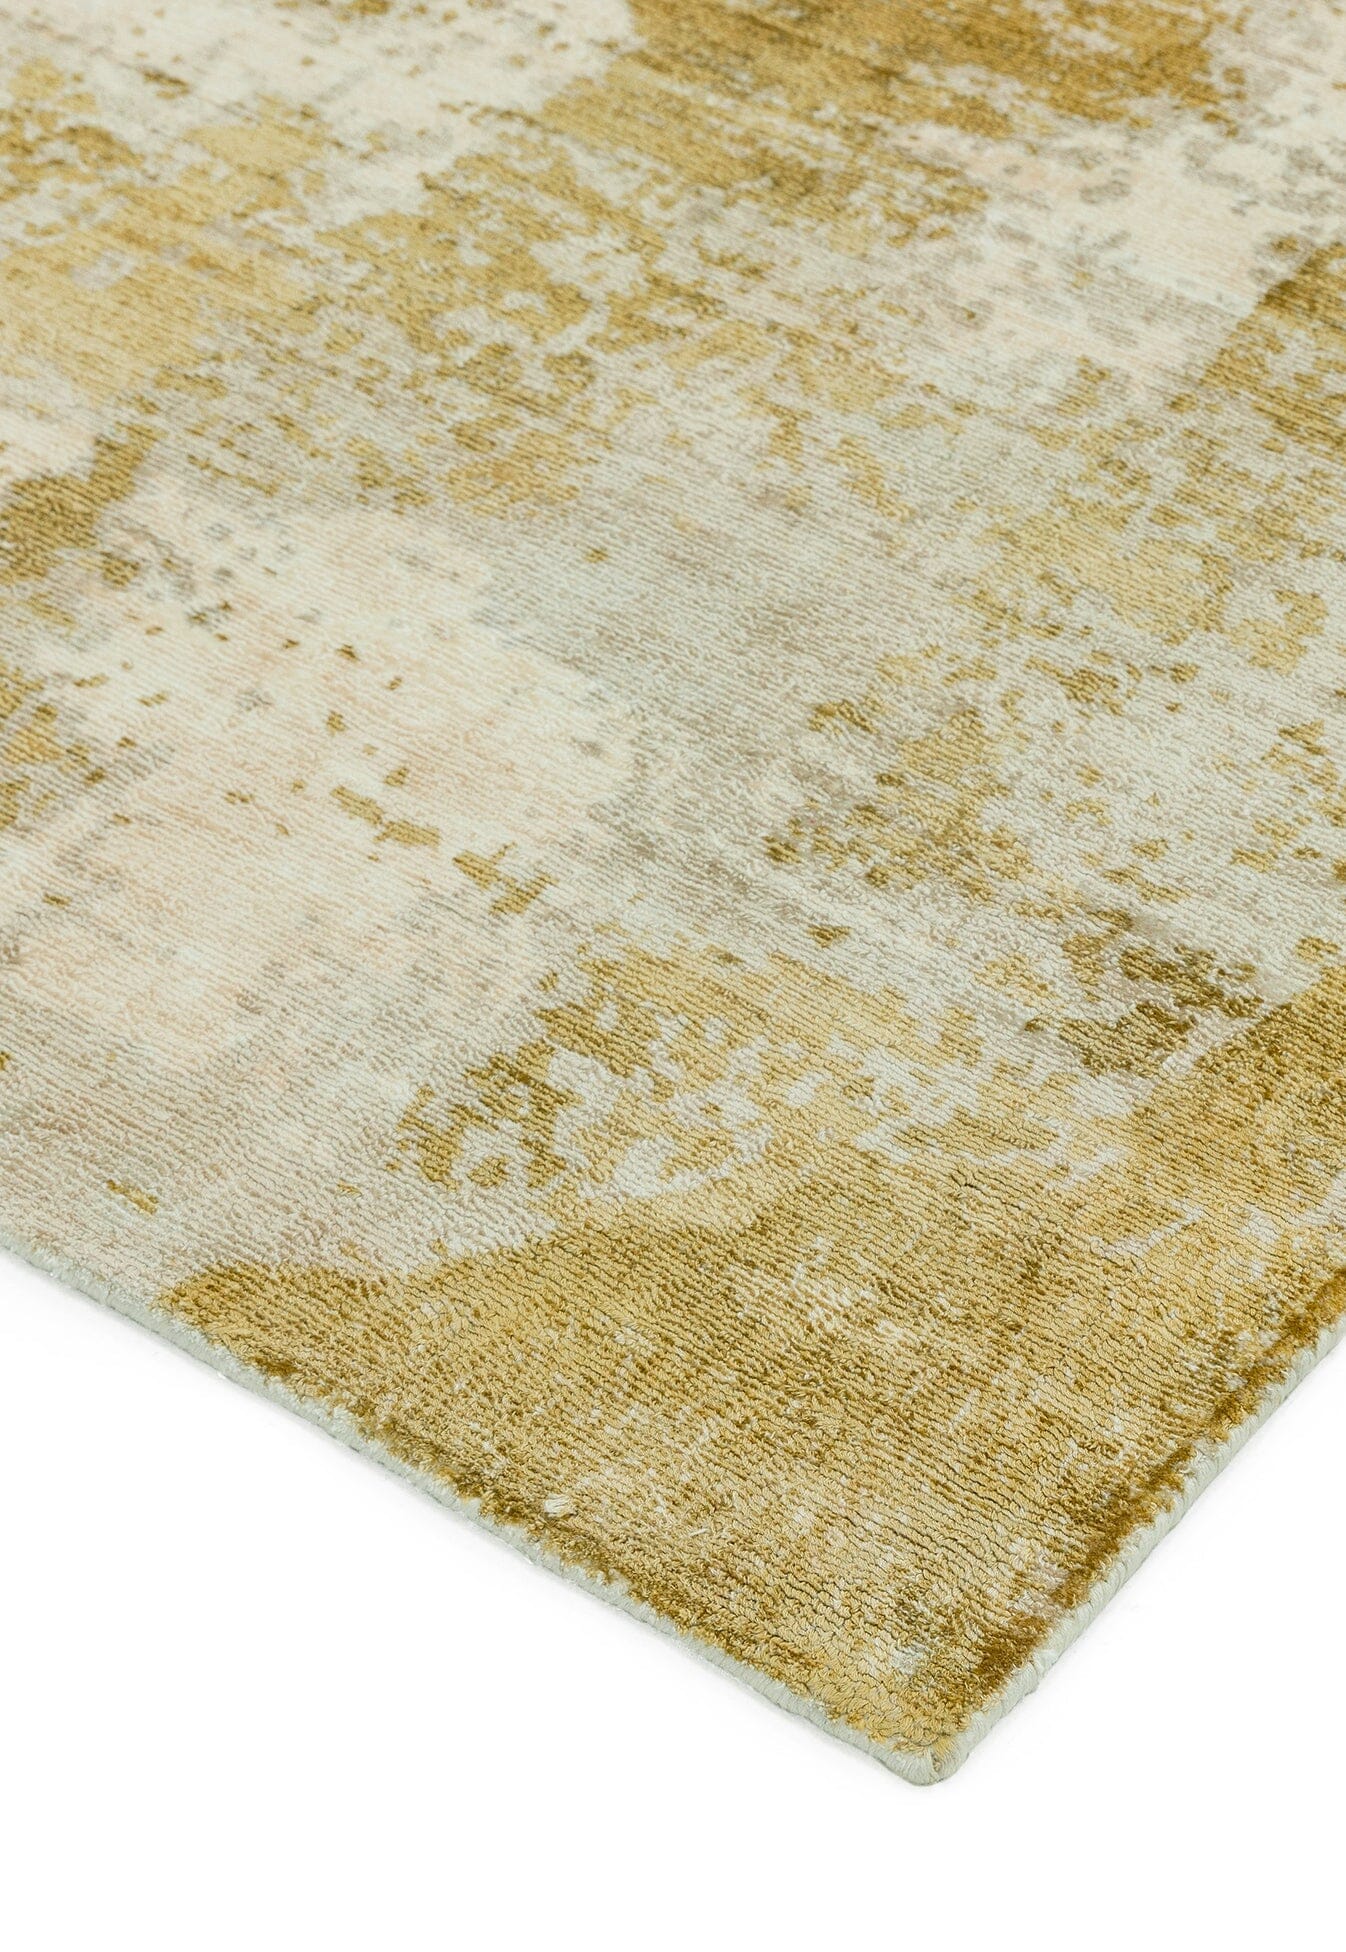  Asiatic Carpets-Asiatic Carpets Gatsby Hand Woven Rug Autumn - 240 x 340cm-Yellow, Gold 781 